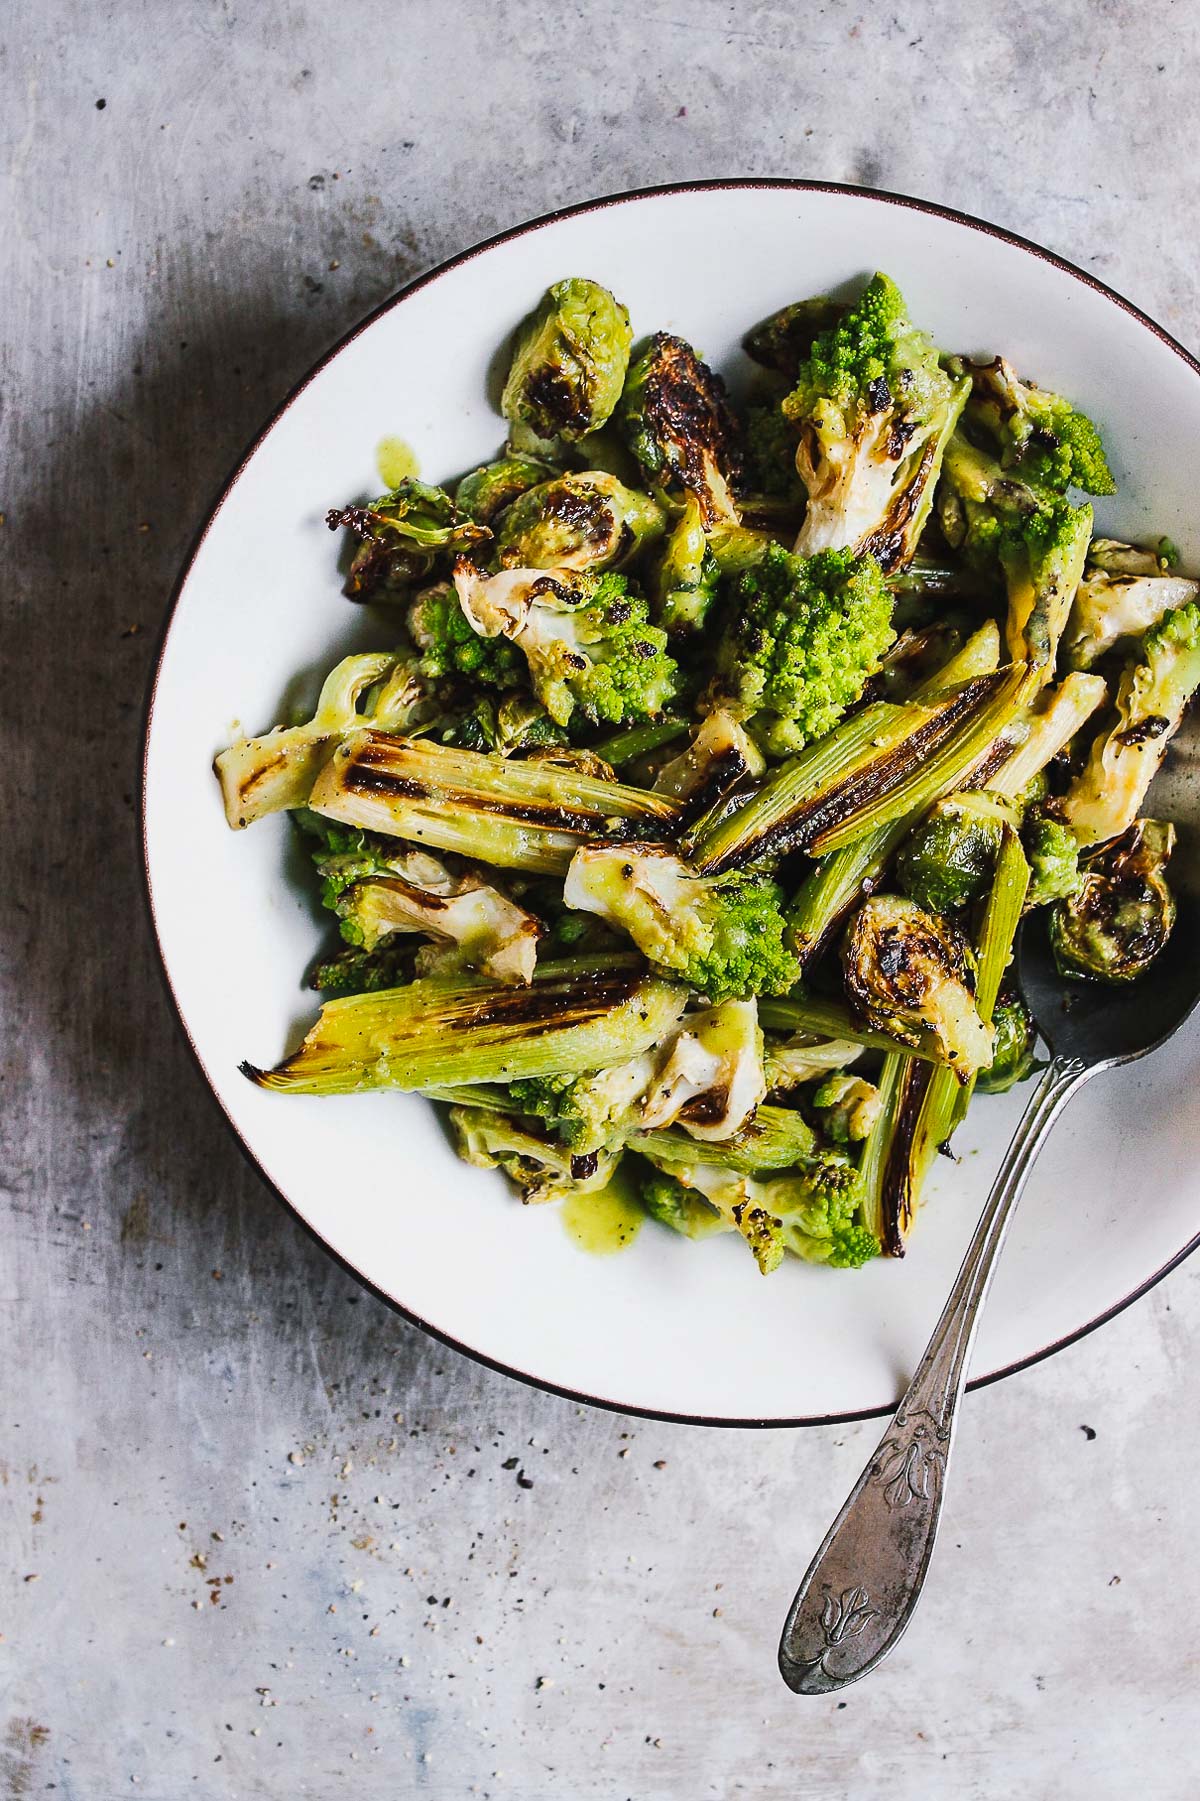 A charred, roasted romanesco salad with brussels and leeks, and tossed in a salty green olive dressing. A warm and hearty salad perfect for fall or winter. #roastedromanesco #romanescorecipes #romanescosalad